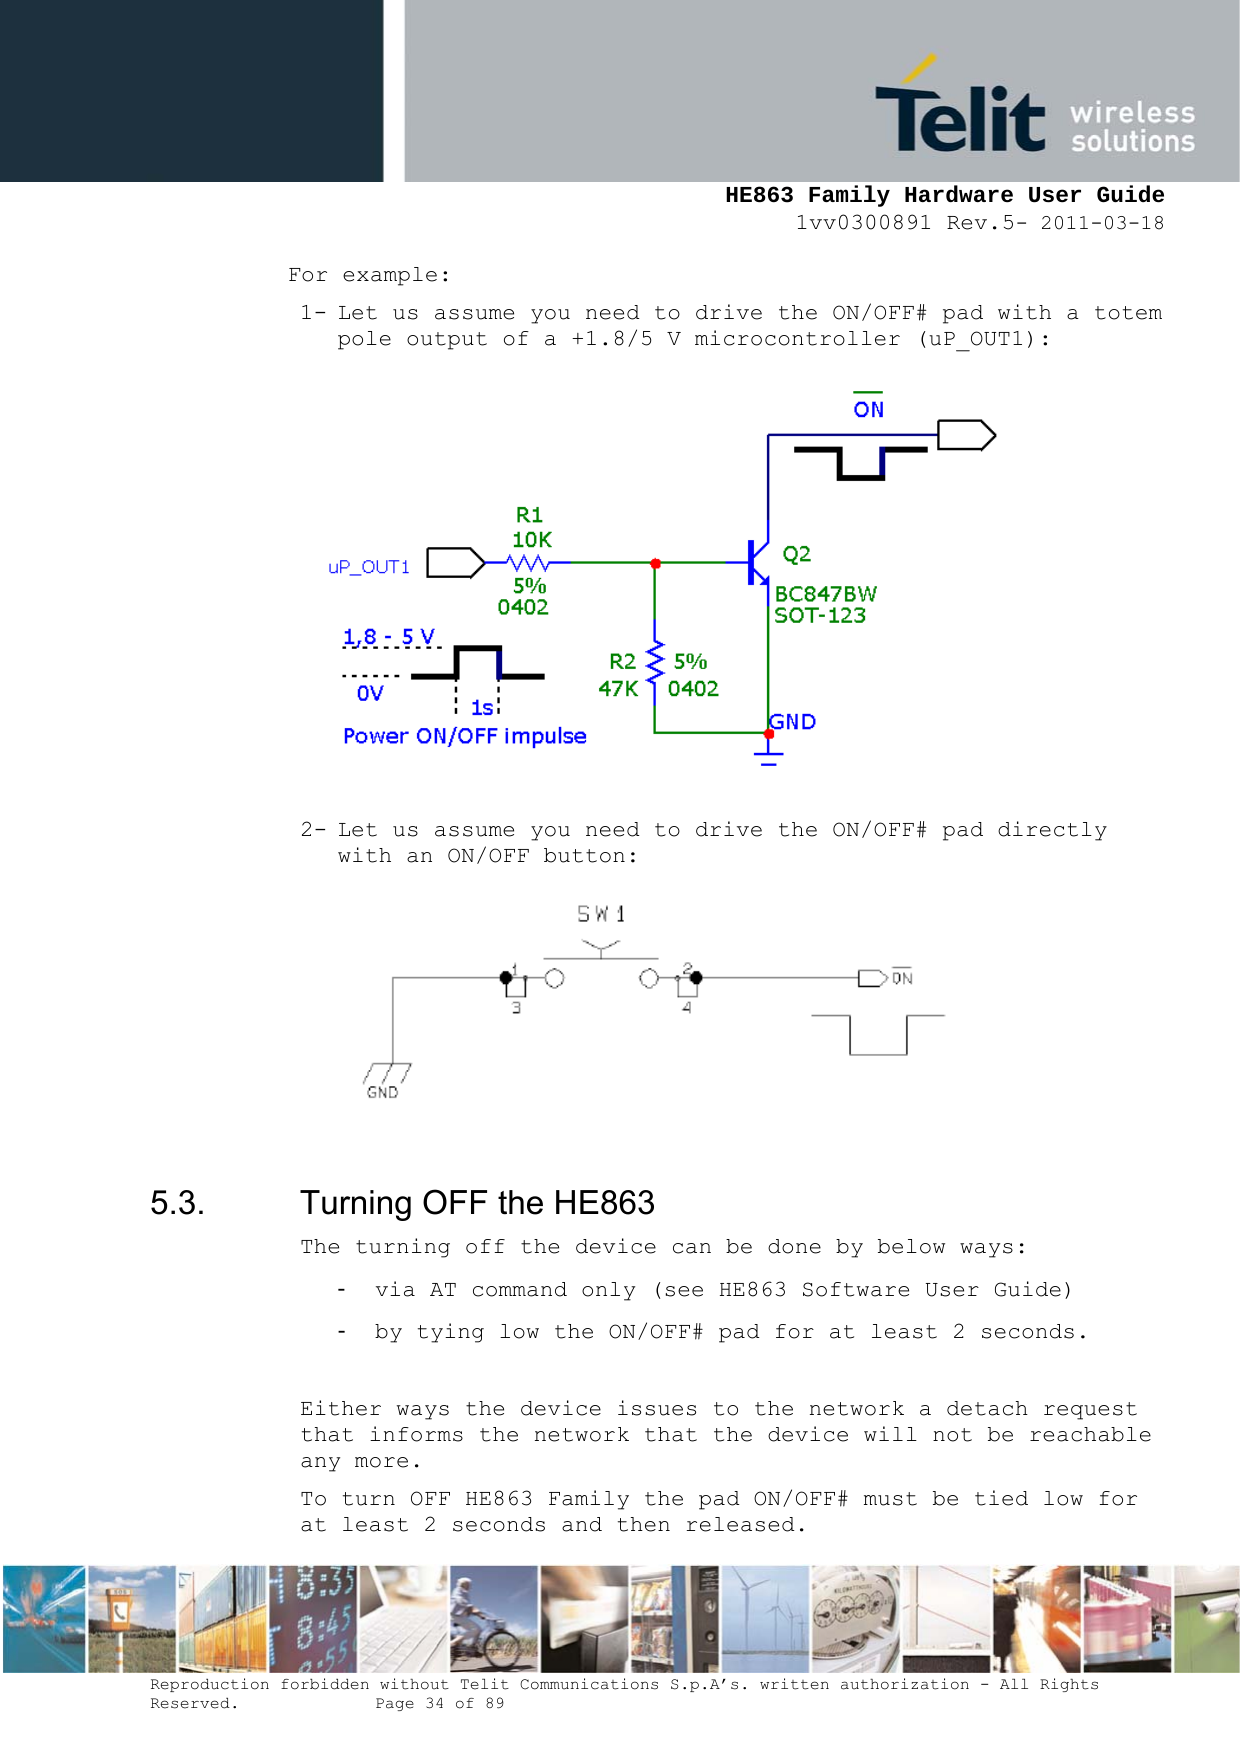     HE863 Family Hardware User Guide 1vv0300891 Rev.5- 2011-03-18    Reproduction forbidden without Telit Communications S.p.A’s. written authorization - All Rights Reserved.    Page 34 of 89  For example: 1- Let us assume you need to drive the ON/OFF# pad with a totem pole output of a +1.8/5 V microcontroller (uP_OUT1):  2- Let us assume you need to drive the ON/OFF# pad directly with an ON/OFF button:   5.3.  Turning OFF the HE863 The turning off the device can be done by below ways: - via AT command only (see HE863 Software User Guide) - by tying low the ON/OFF# pad for at least 2 seconds.  Either ways the device issues to the network a detach request that informs the network that the device will not be reachable any more. To turn OFF HE863 Family the pad ON/OFF# must be tied low for at least 2 seconds and then released. 